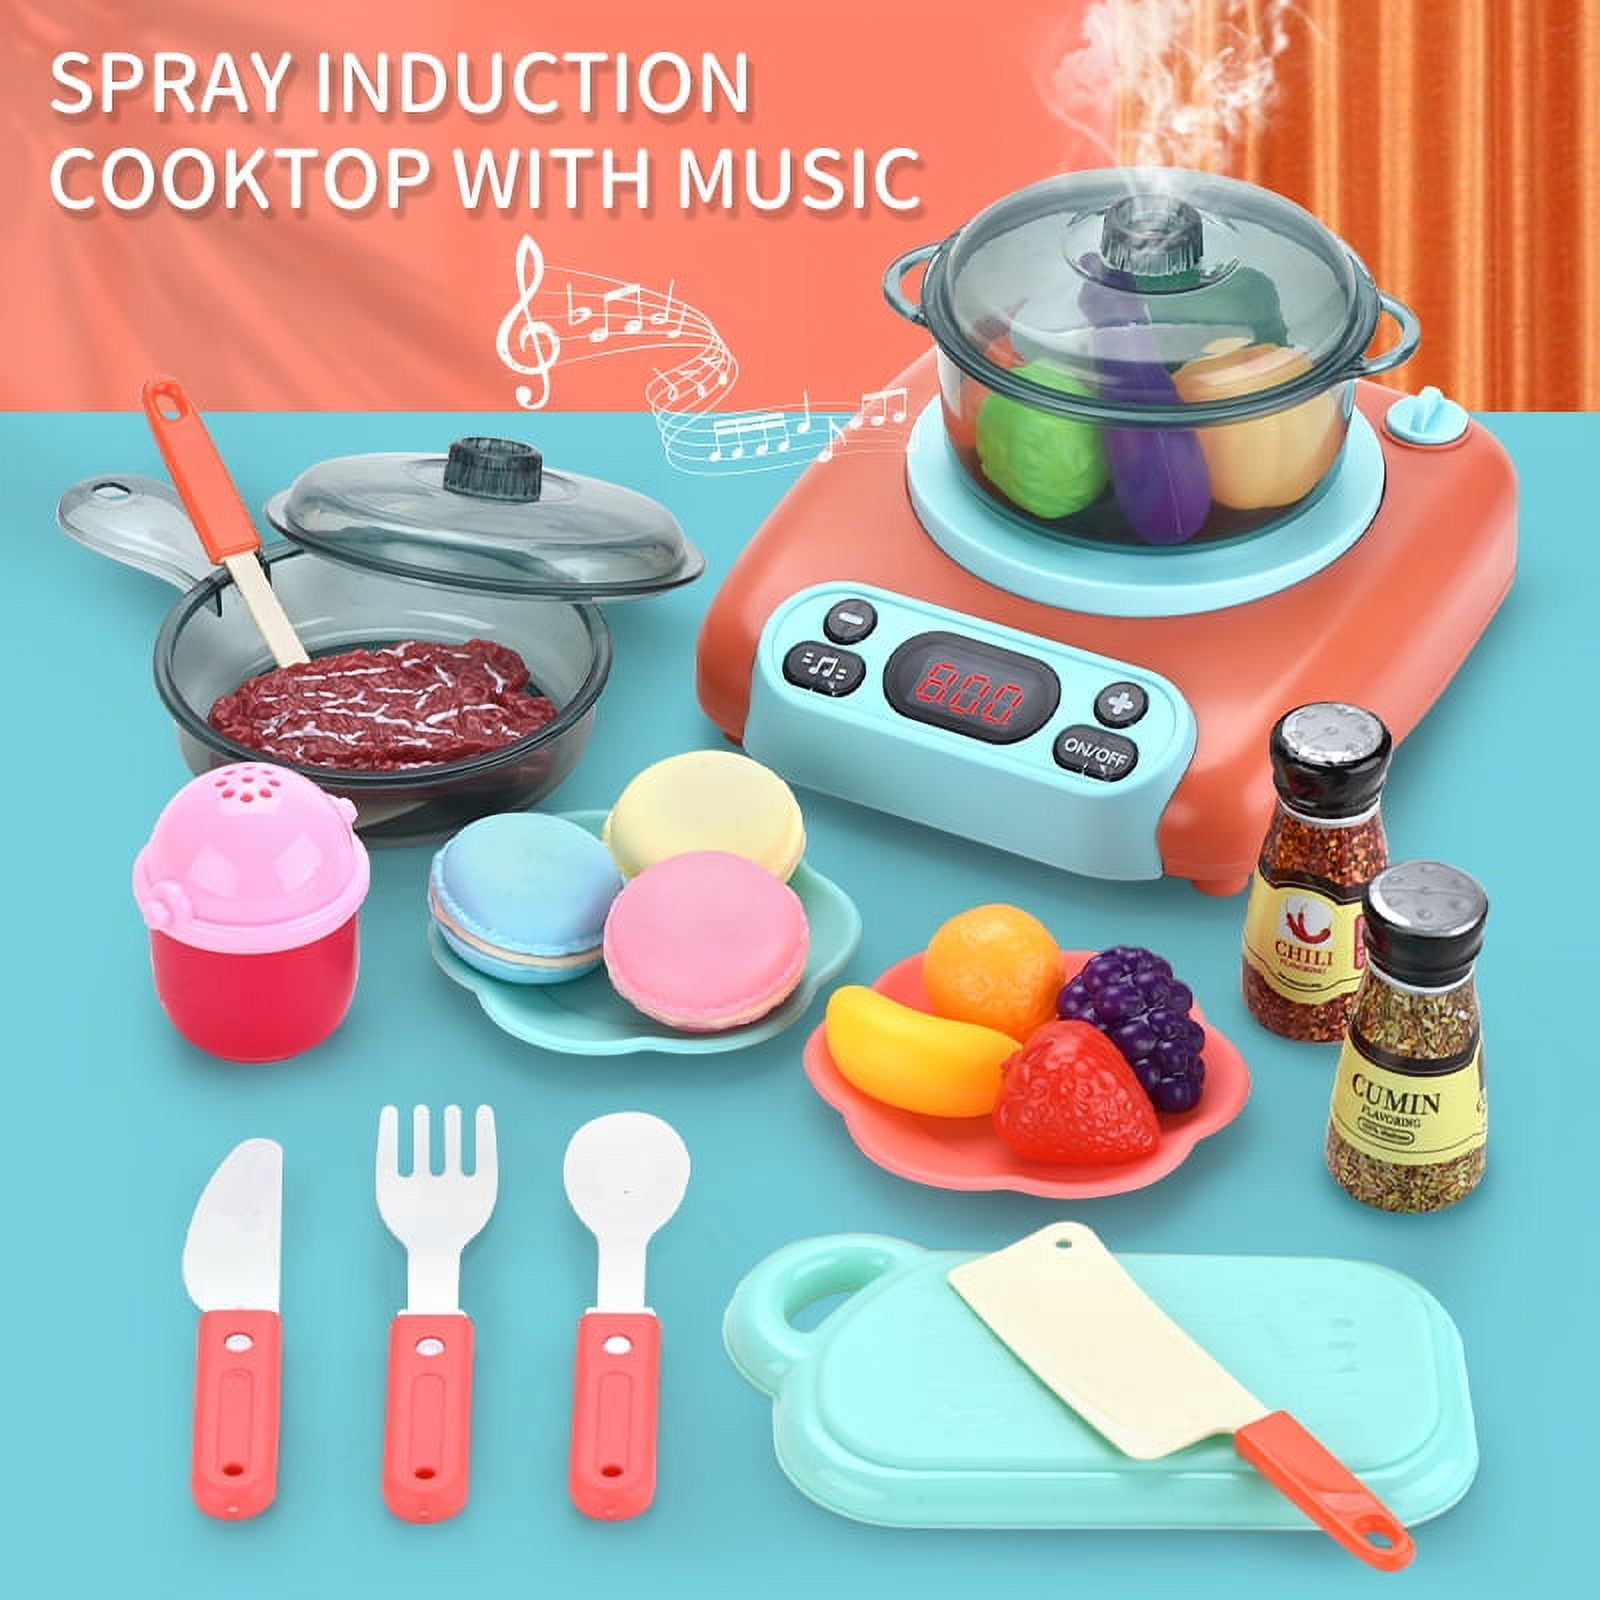 Children's Play Kitchen Toys, Baby Girls Cooking Pots, Boys And Girls  Cooking Simulation Kitchenware, Birthday Gifts